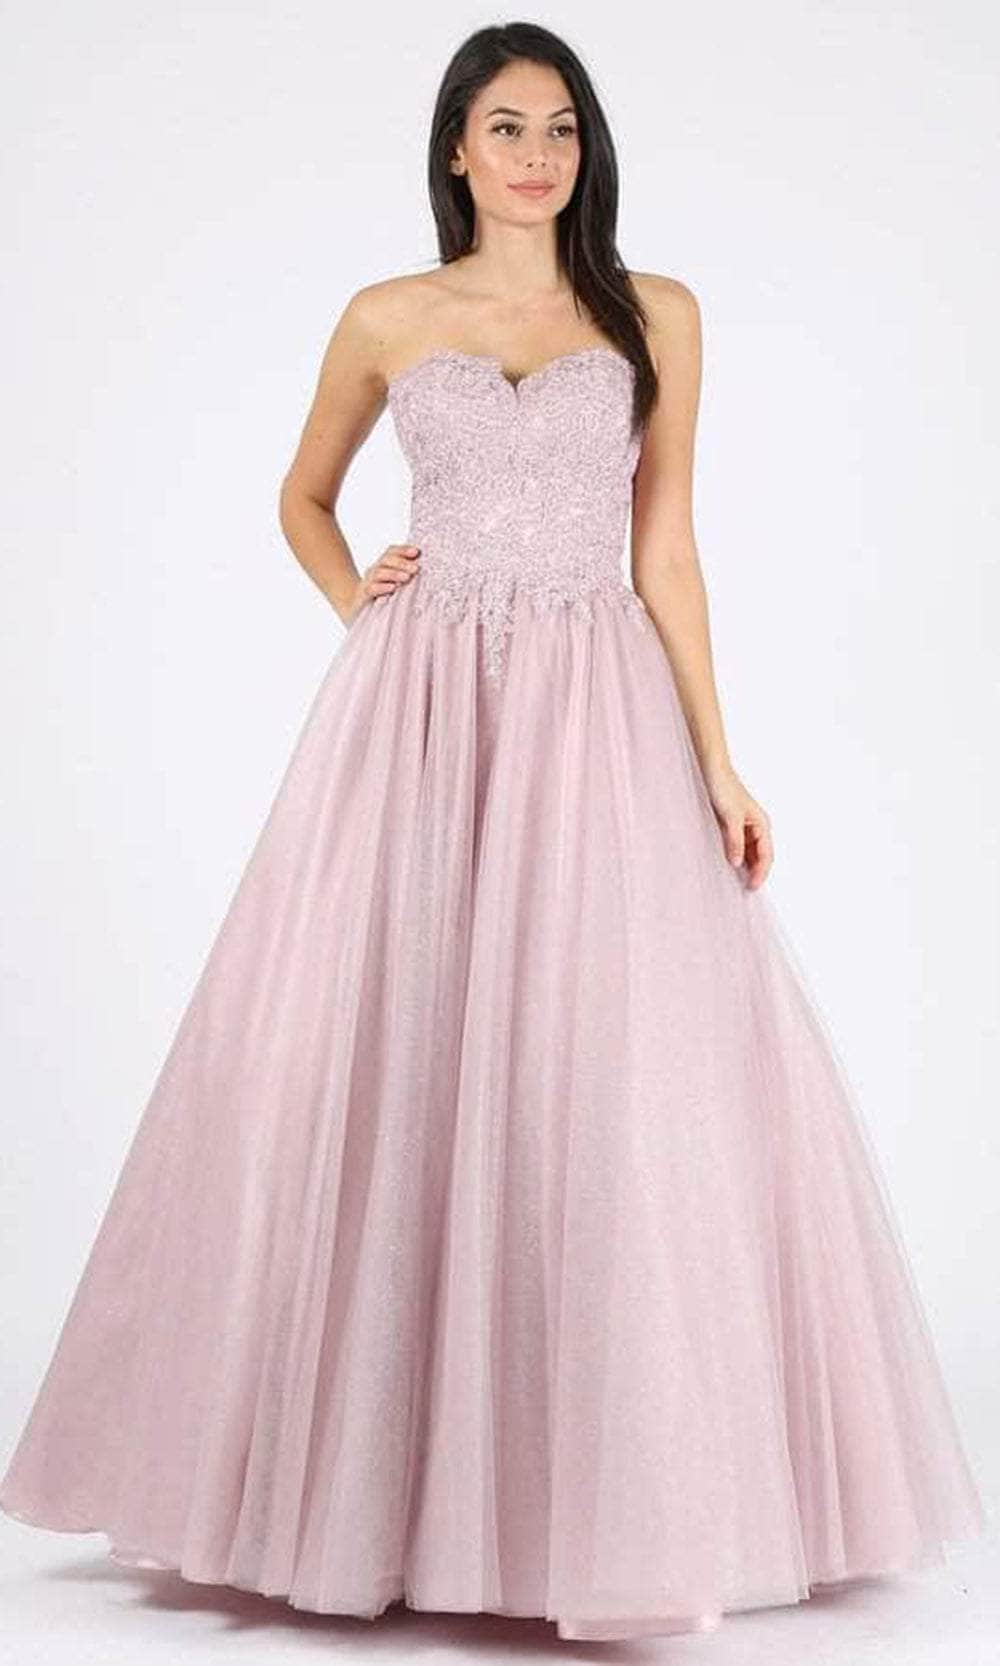 Image of Eureka Fashion 9898 - Embroidered Sweetheart Neck Long Gown